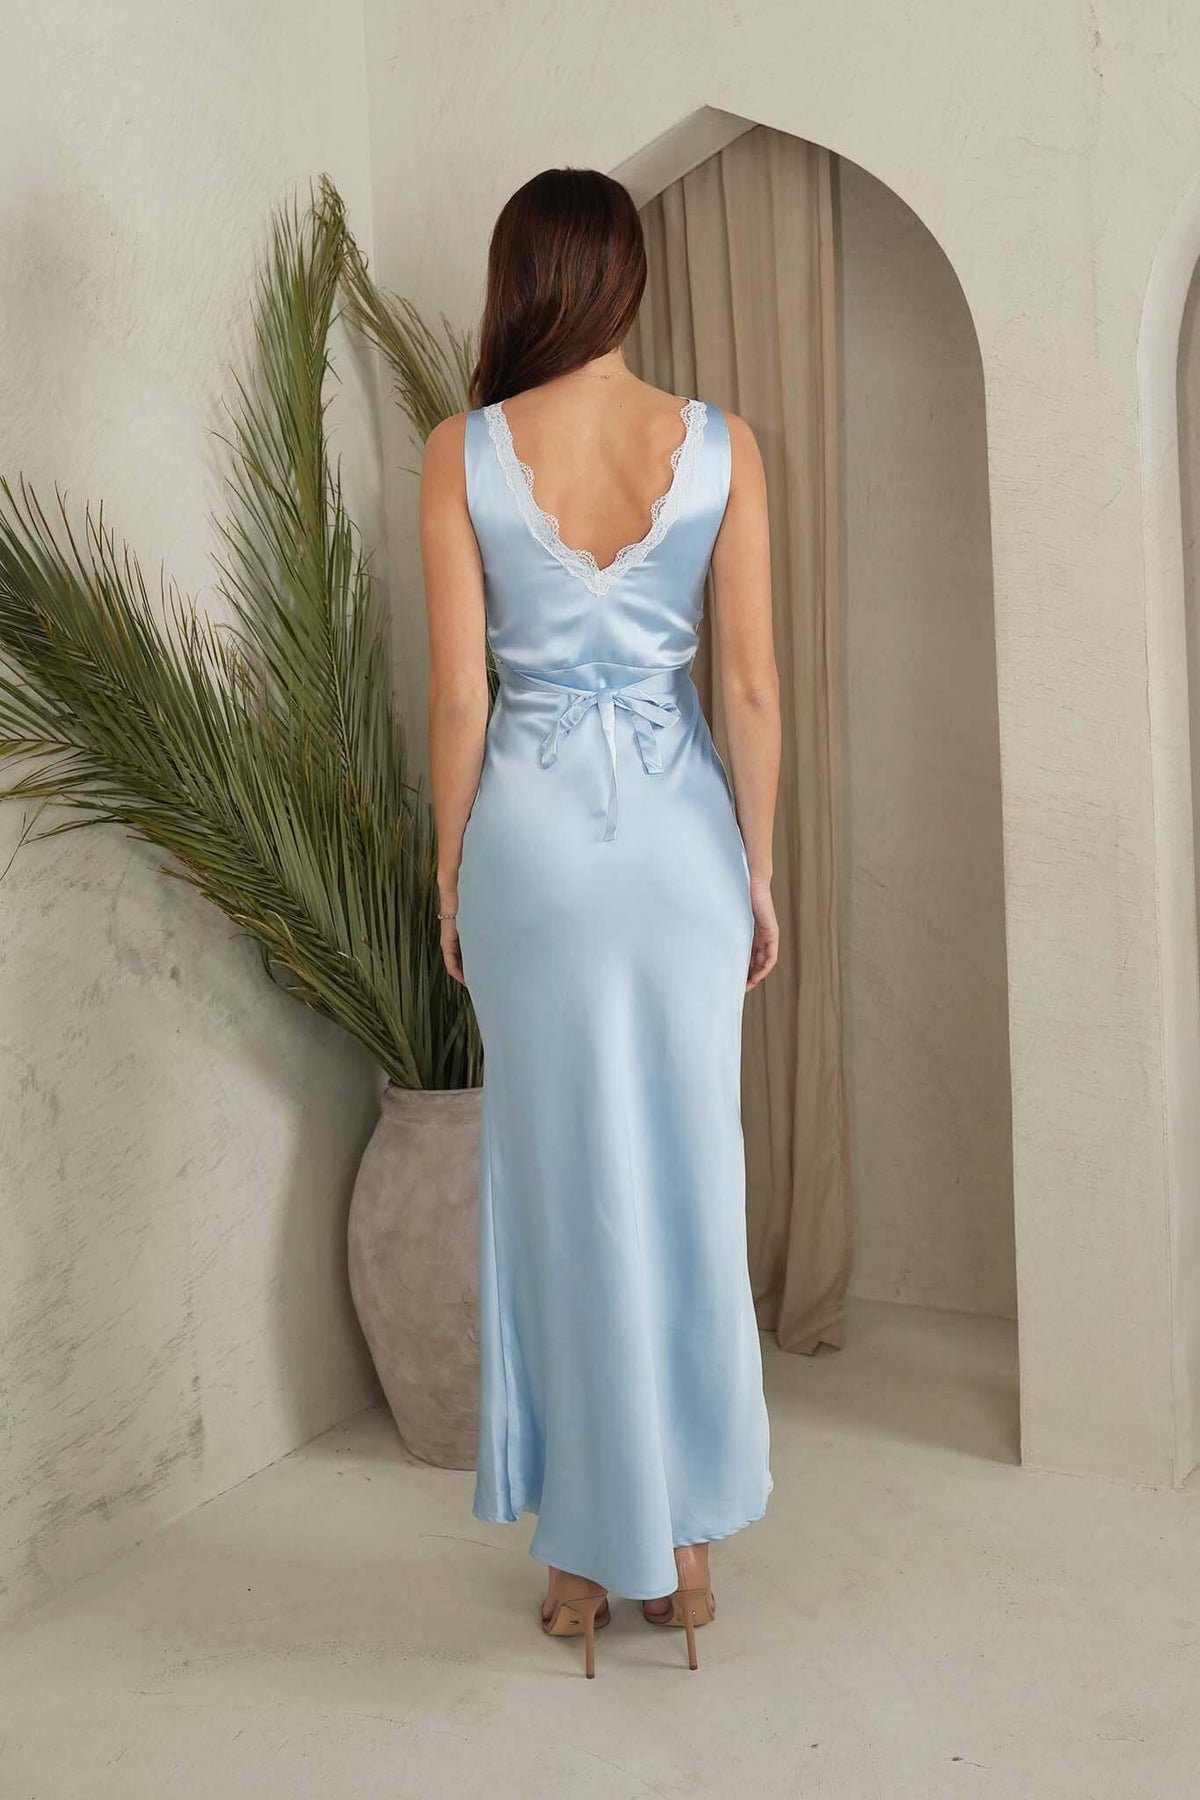 V Open Back with Floral Lace Trim of Light Blue Silky Satin Sleeveless Maxi Dress with Deep V Neckline and Floral Lace Trim